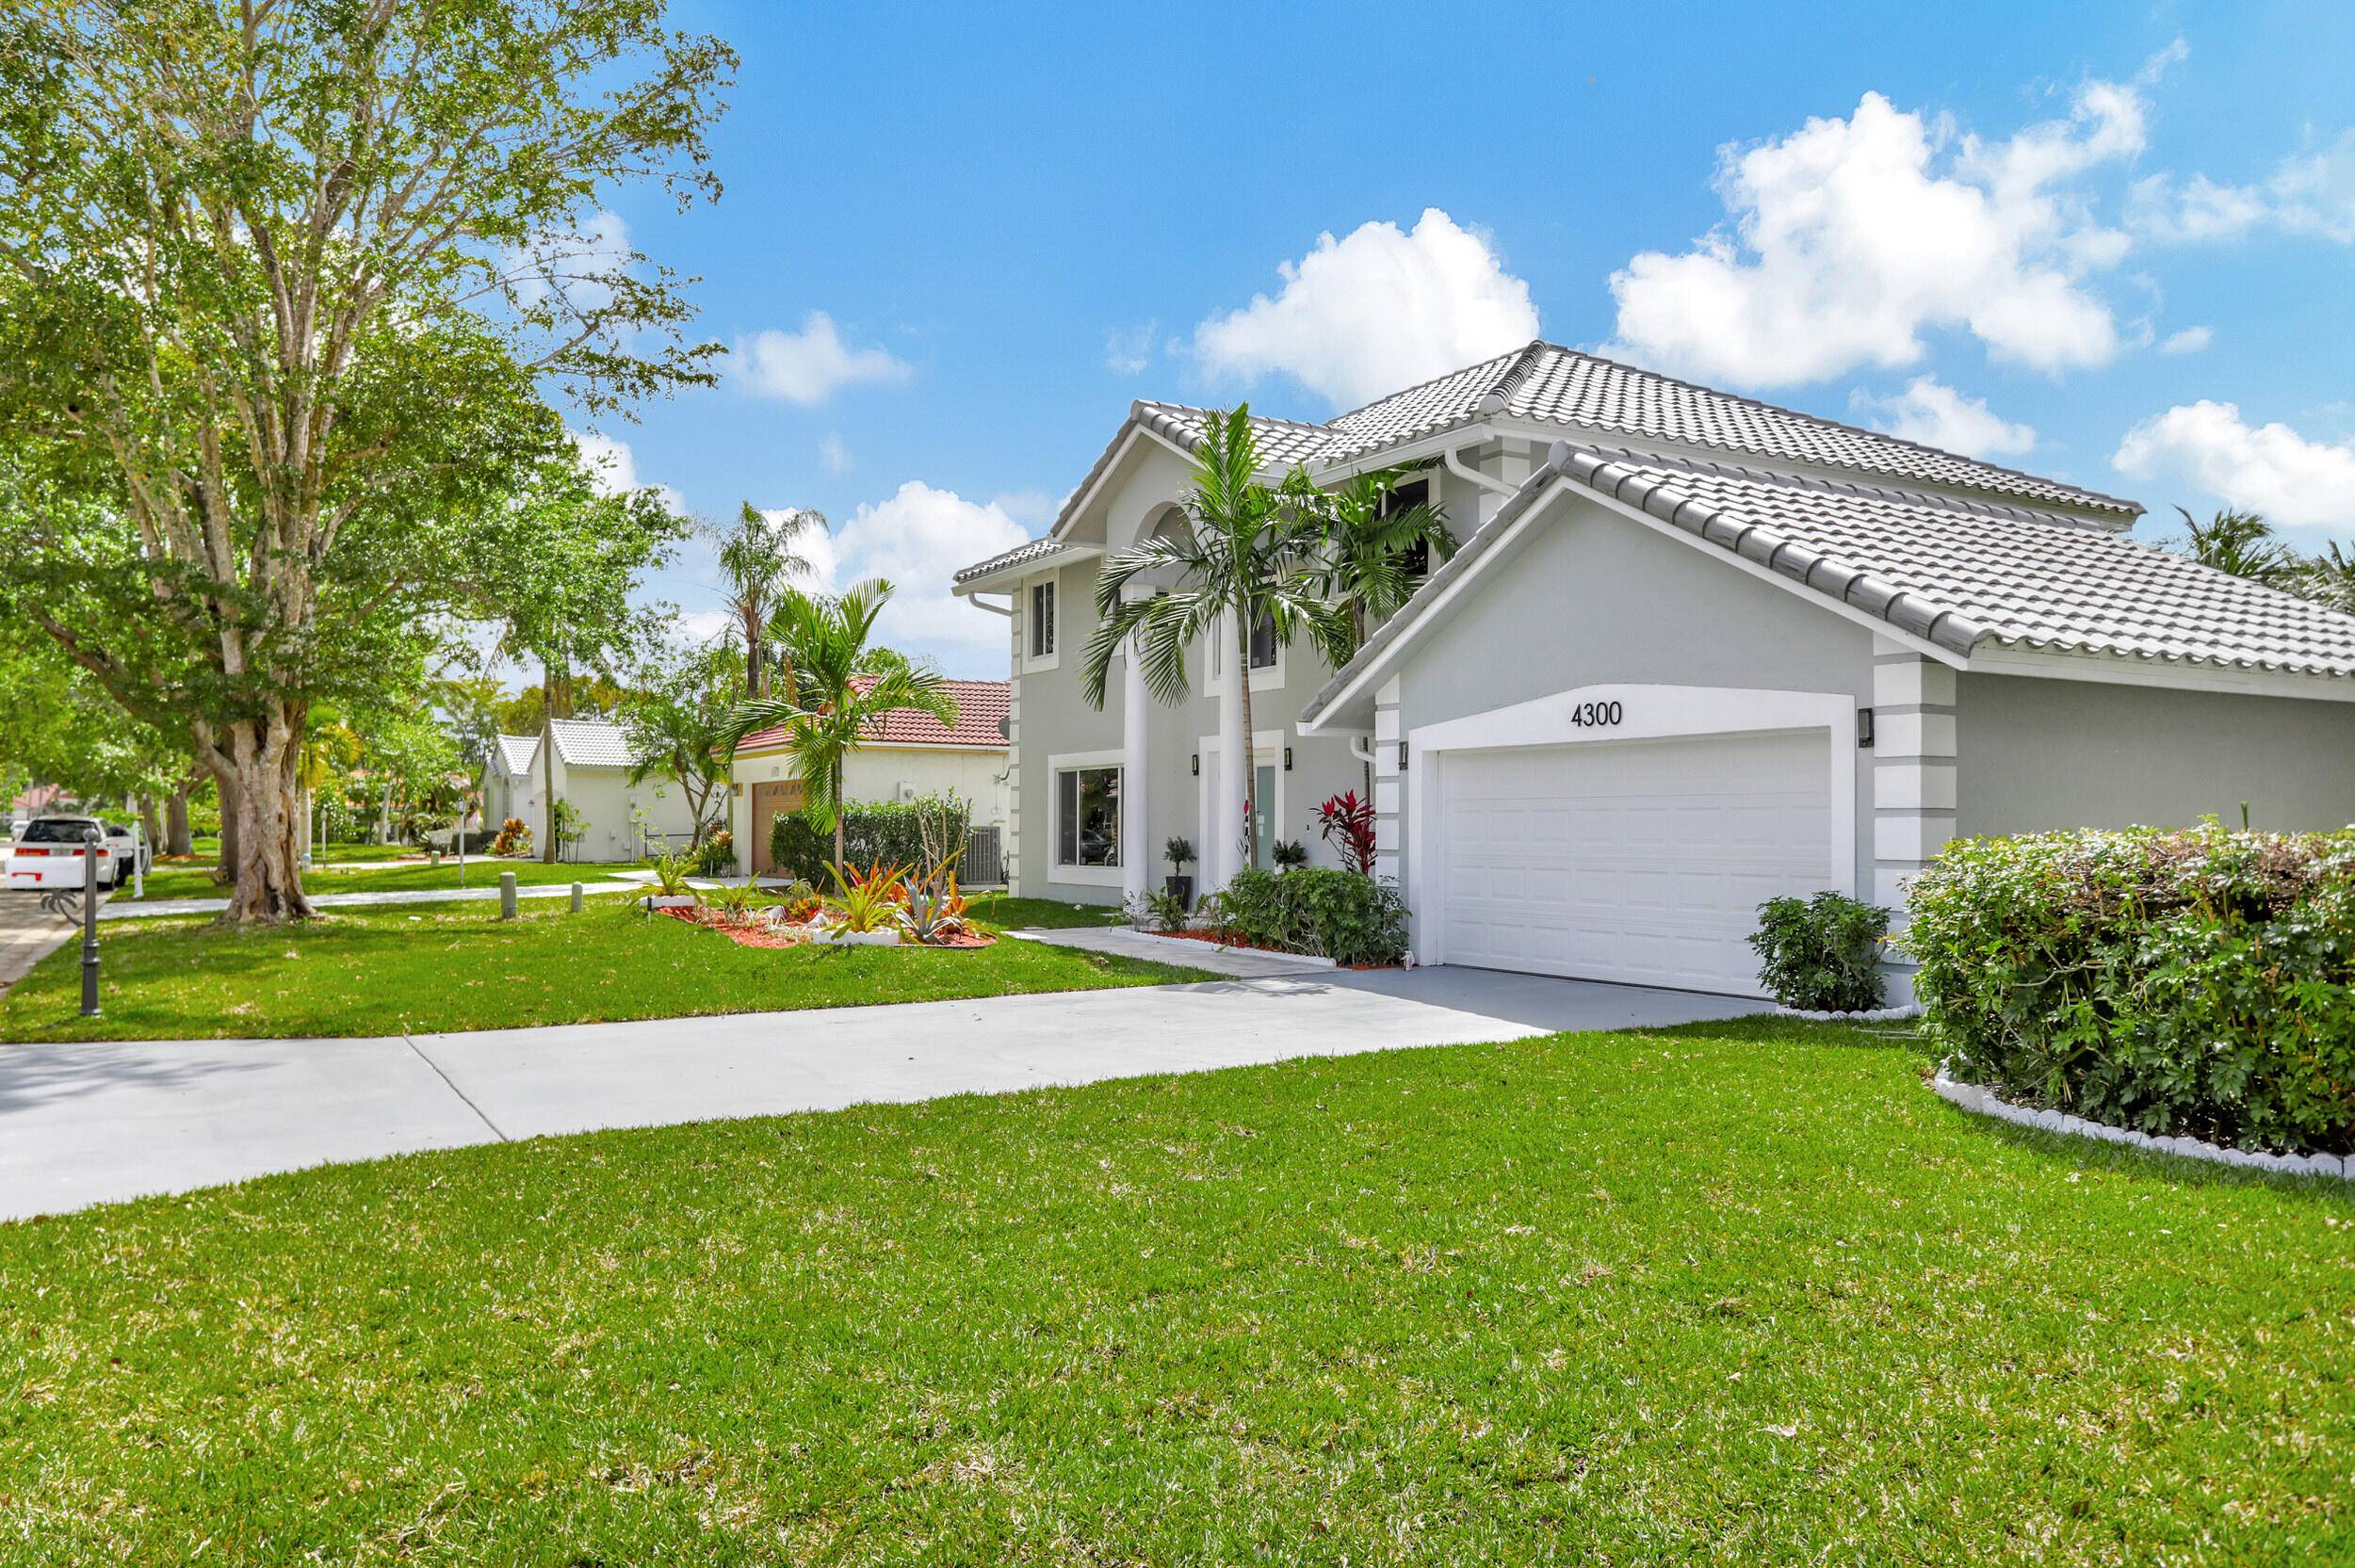 This stunning 4BR, 2 1 2 Bath home is on an oversized corner lot, and features a brand new tile roof, all new impact storm protection windows, exterior doors, and ...